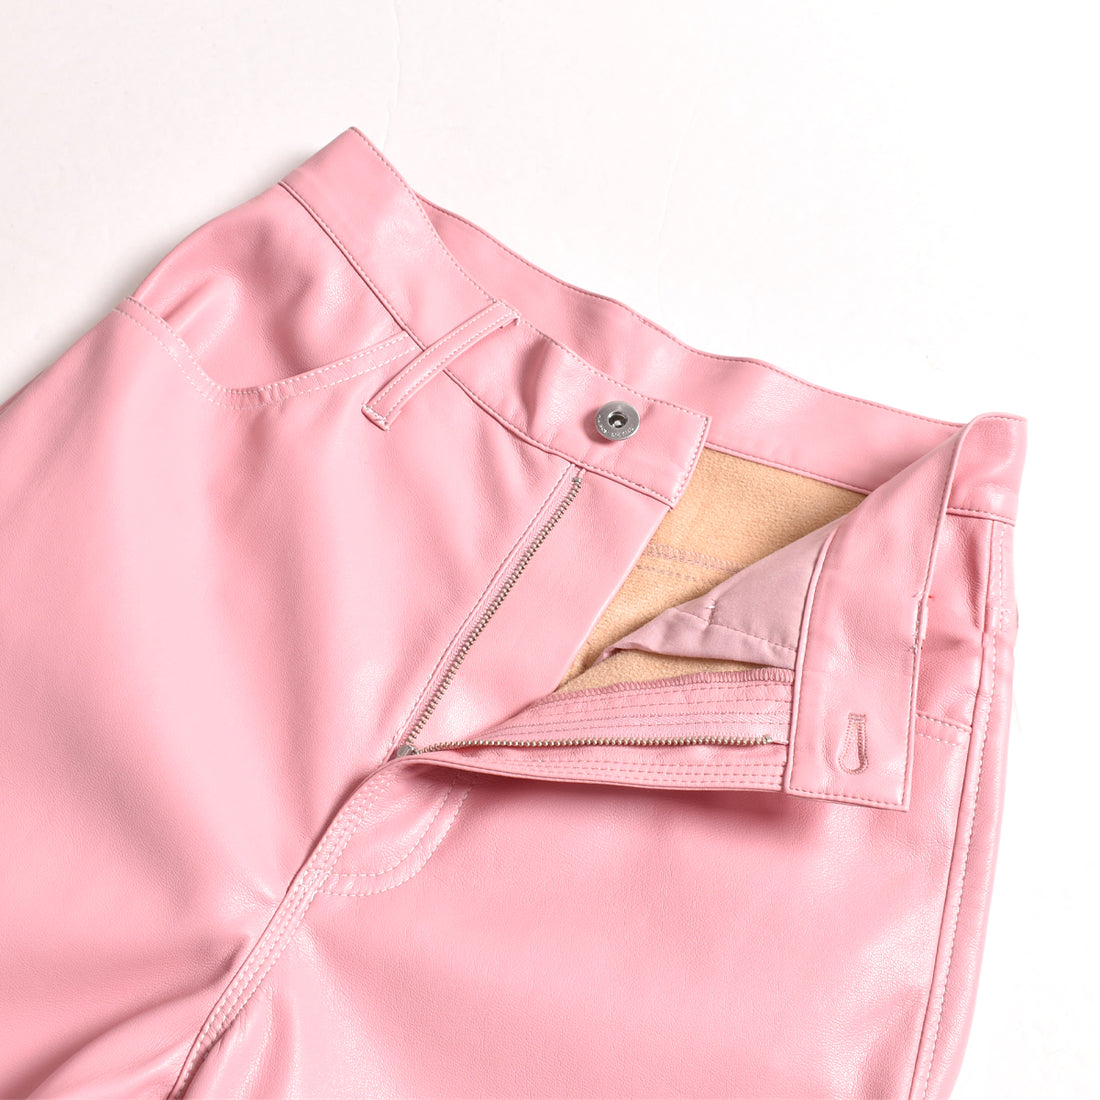 [MAISON SPECIAL]Vegan Leather Wide Straight Pants/PINK(21232465101)